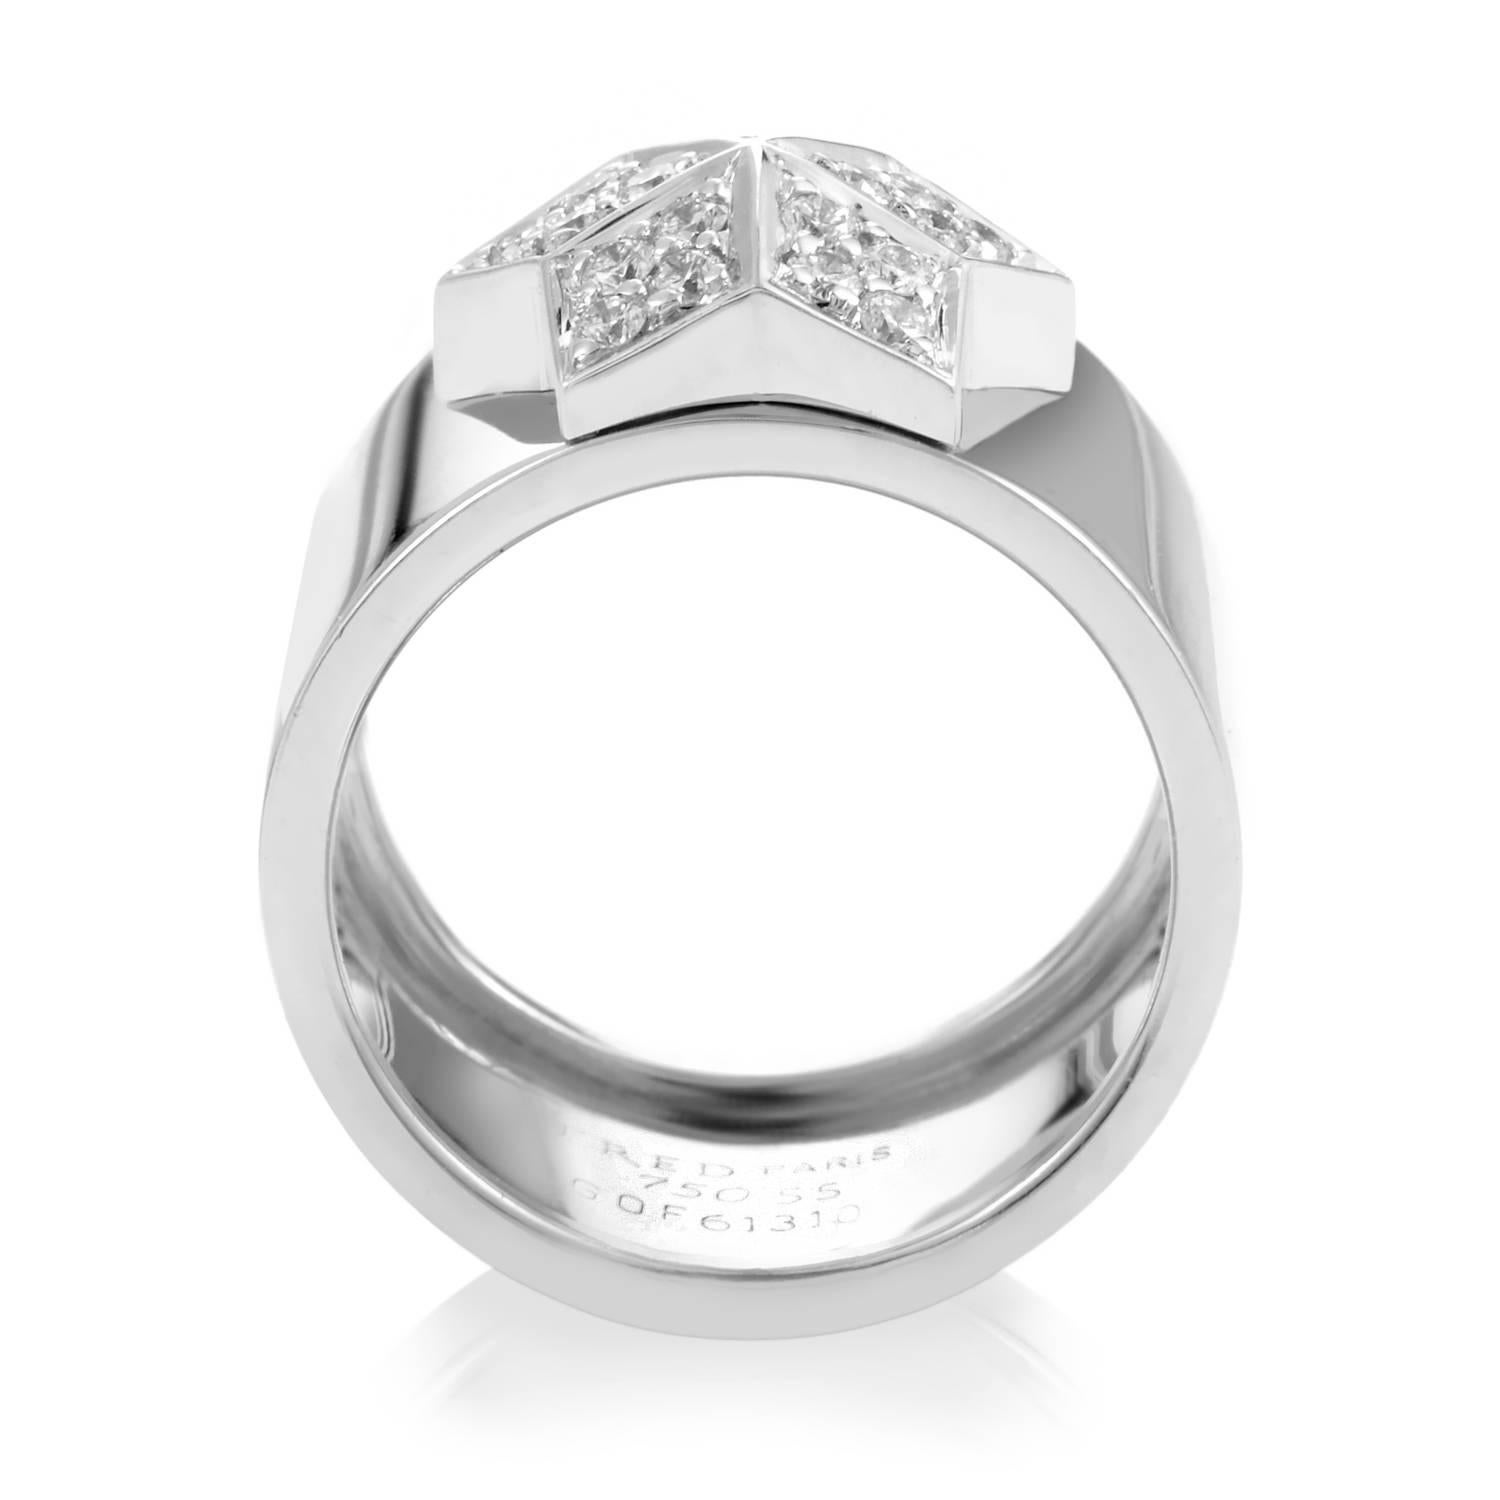 Fred of Paris has created an unabashed design bursting with timeless glare. Unlike shooting stars, this ring can be viewed again and again. The band is a wide tide of 18K white gold rolling up to showcase a platformed star motif. Each arm of the